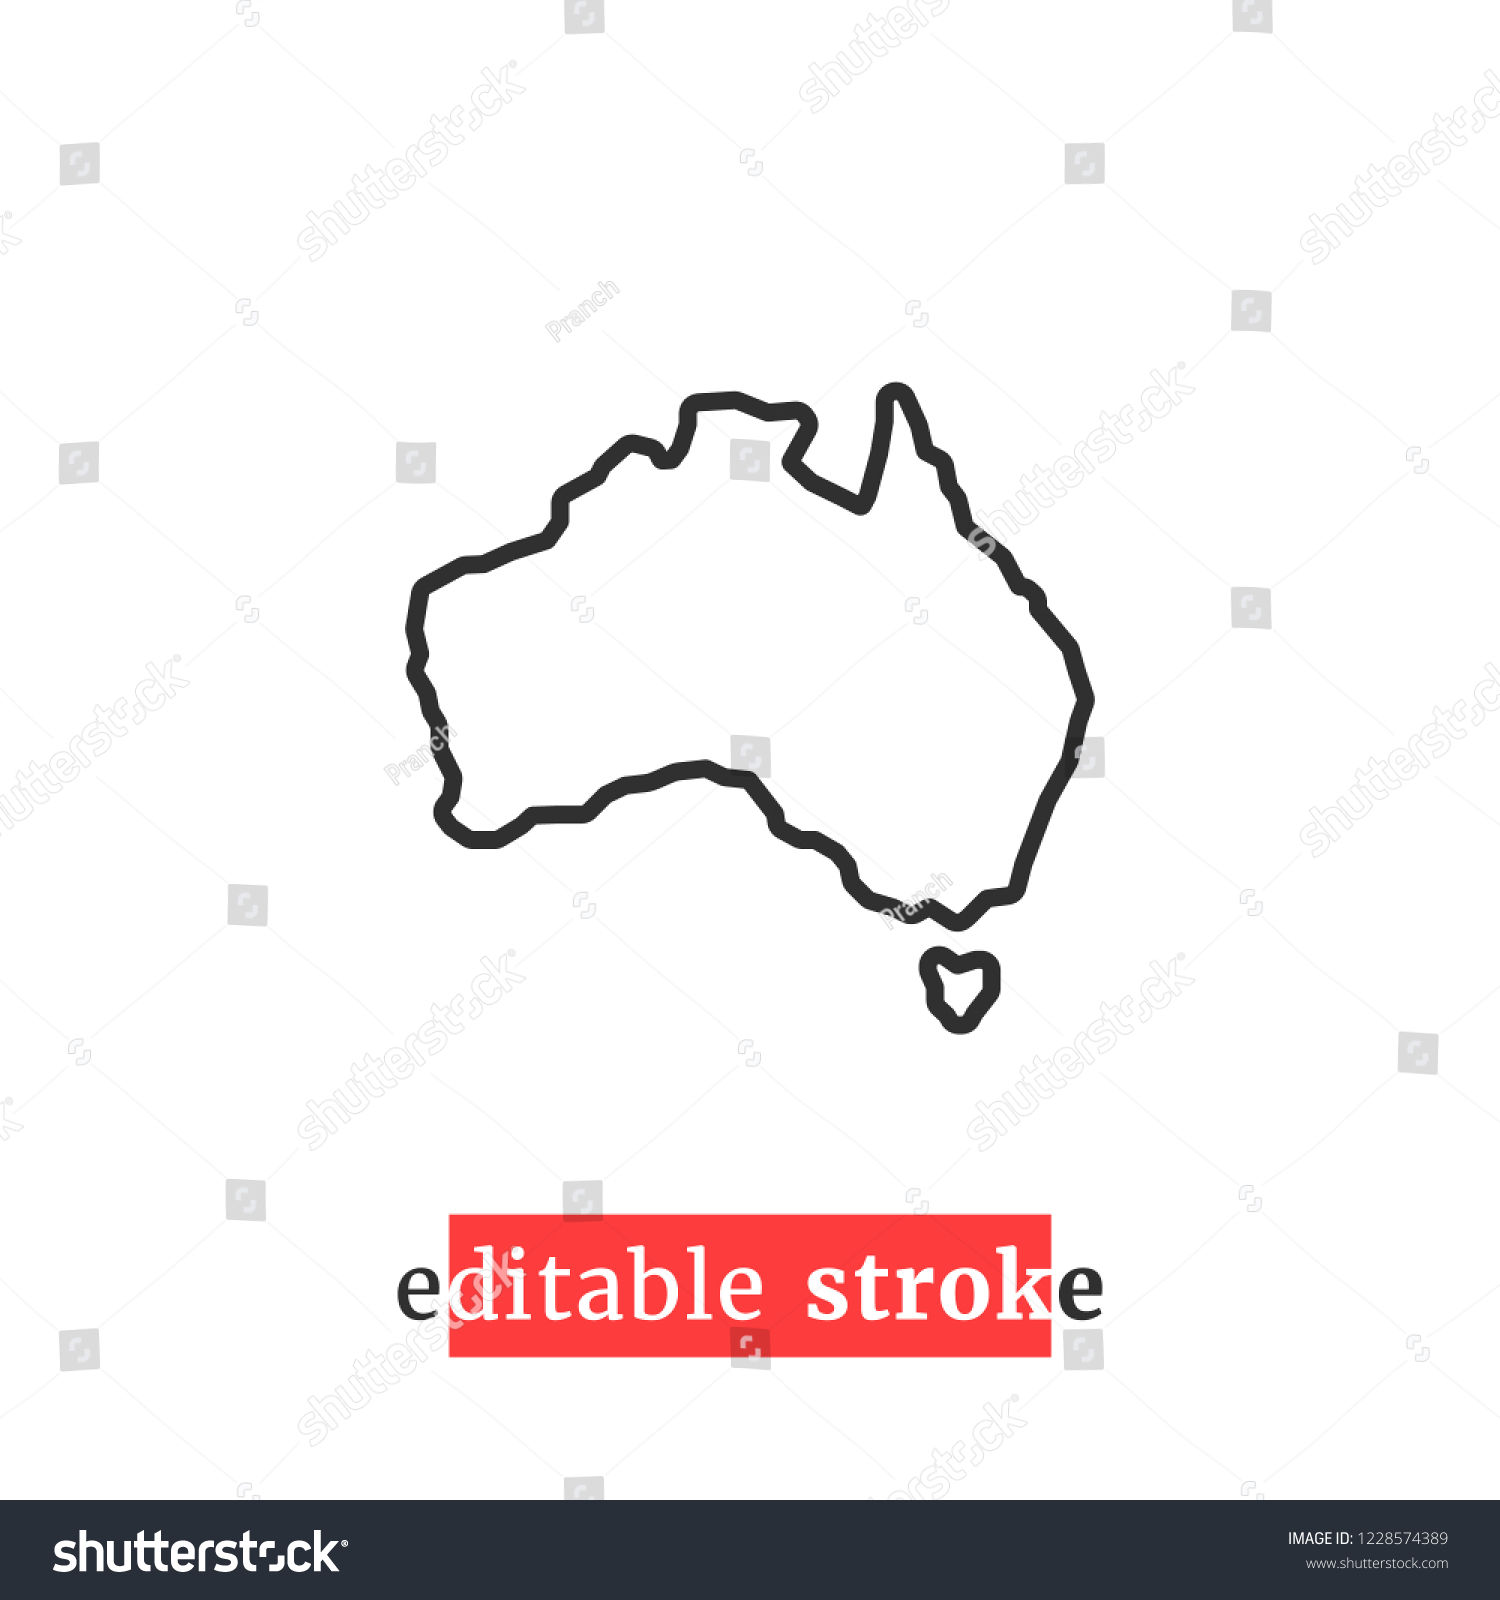 minimal editable stroke australia map icon. flat trend change line thickness logotype graphic lineart design art isolated on white. concept of australian coastline label and world trip nation tourism #1228574389